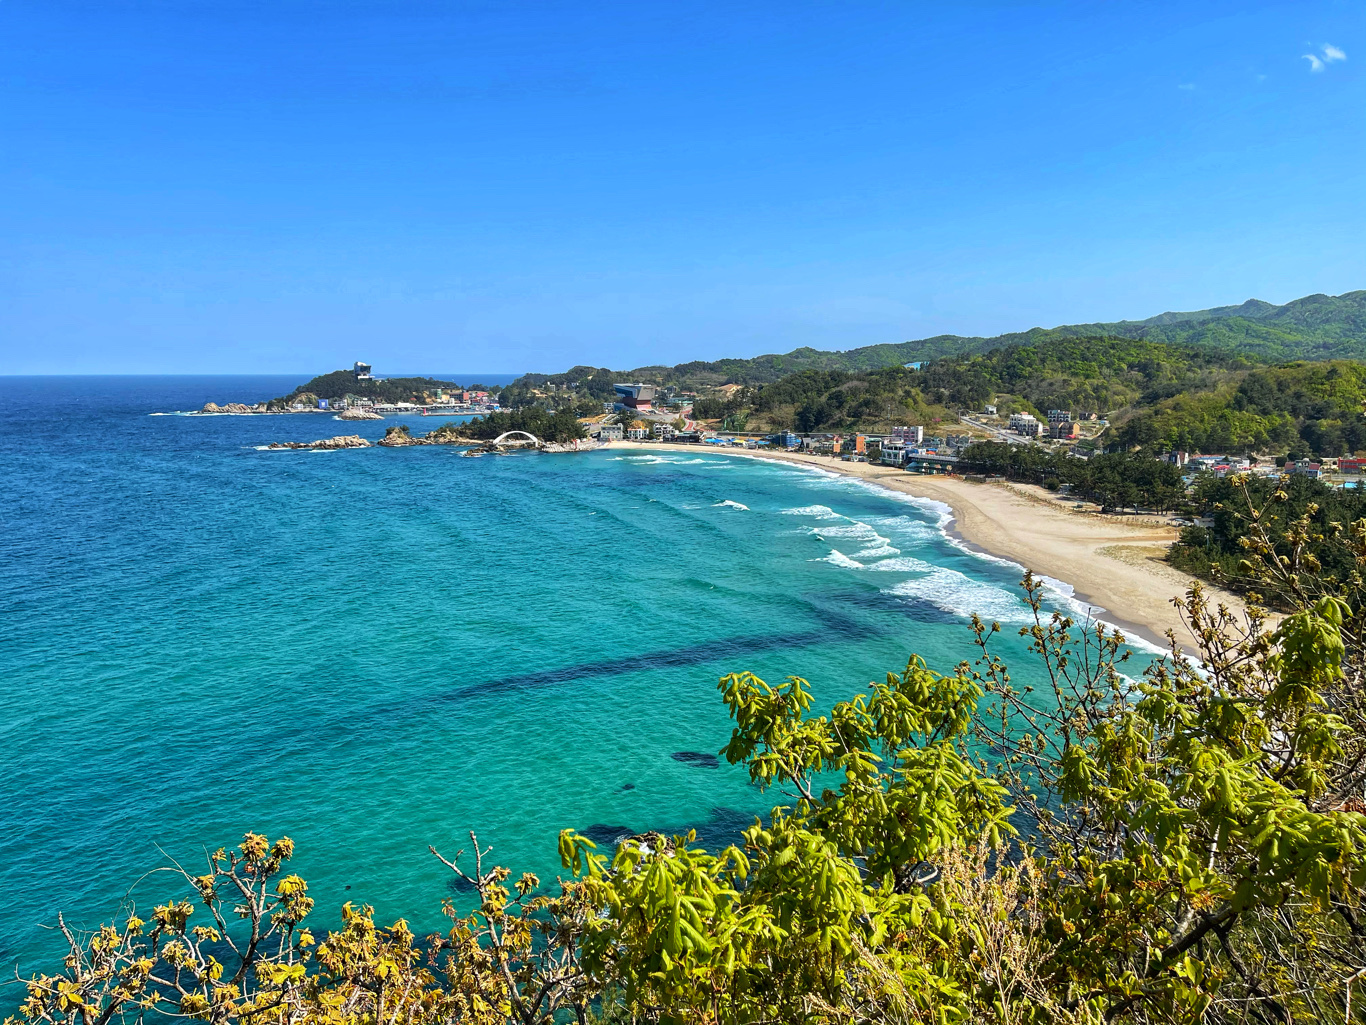 Samcheok Beach is a beautiful long stretch of white sandy beach in Gangwon Province, South Korea. The area is serene but attracts more guests during holidays.